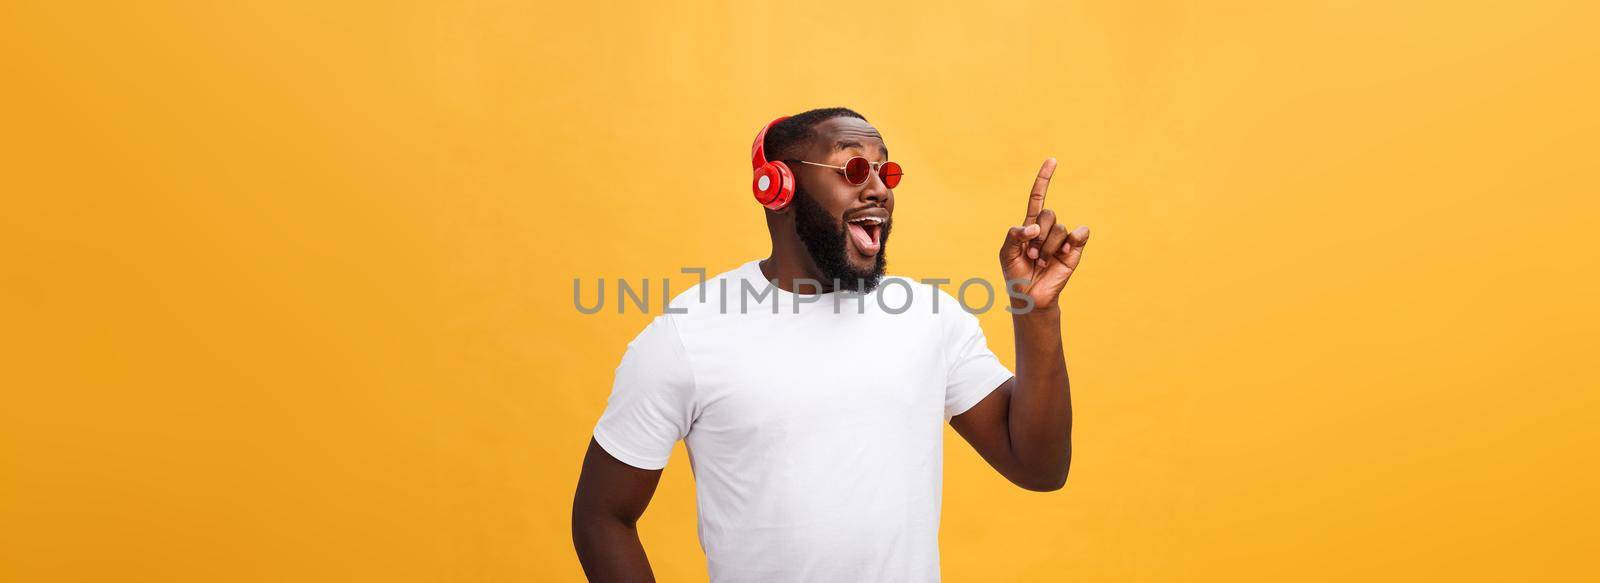 Handsome young African American man listening and smiling with music on his mobile device. Isolated over yellow background